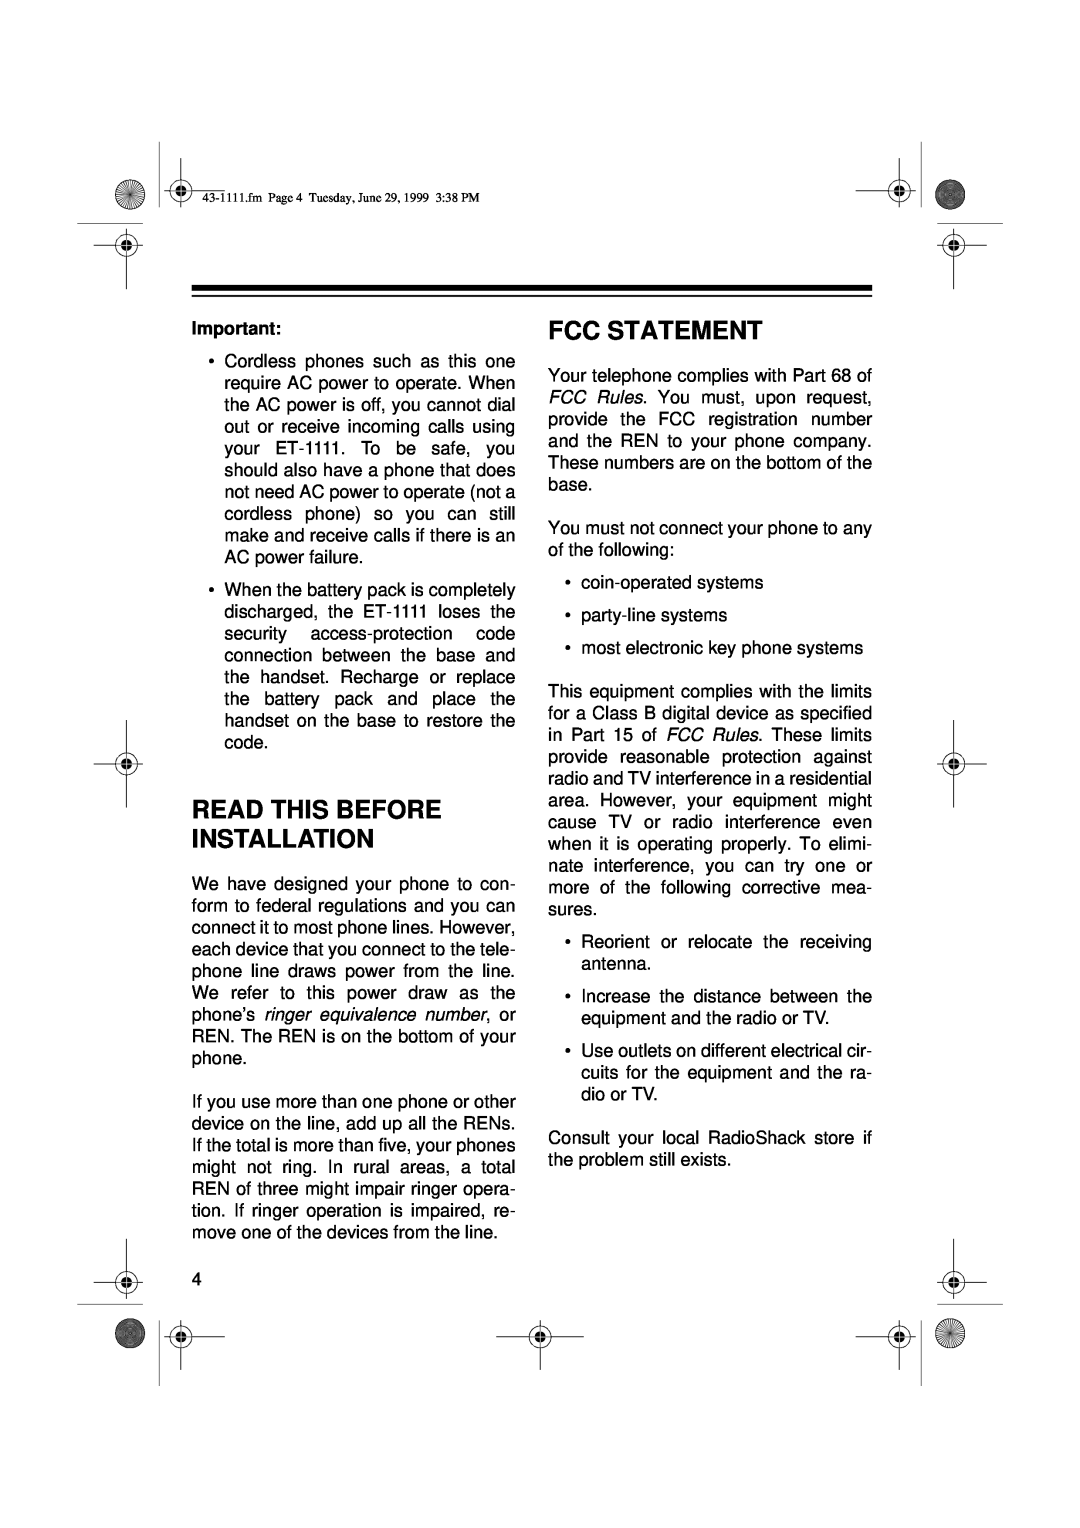 Radio Shack ET-1111 owner manual Read This Before Installation, Fcc Statement 